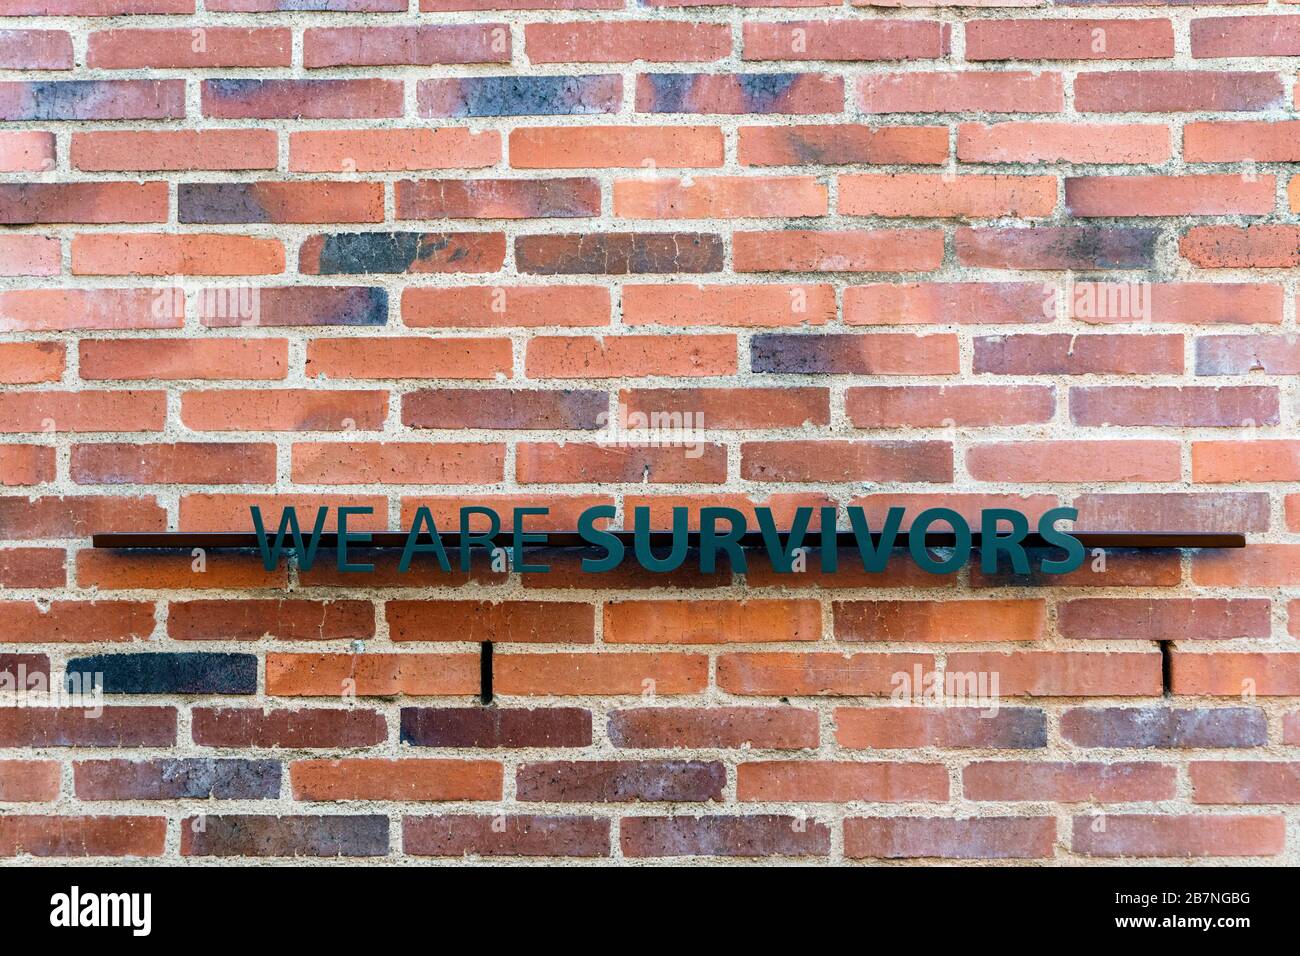 Johannesburg, South Africa - May 25, 2019: We are Survivors sign on brick wall in Apartheid Museum. Stock Photo